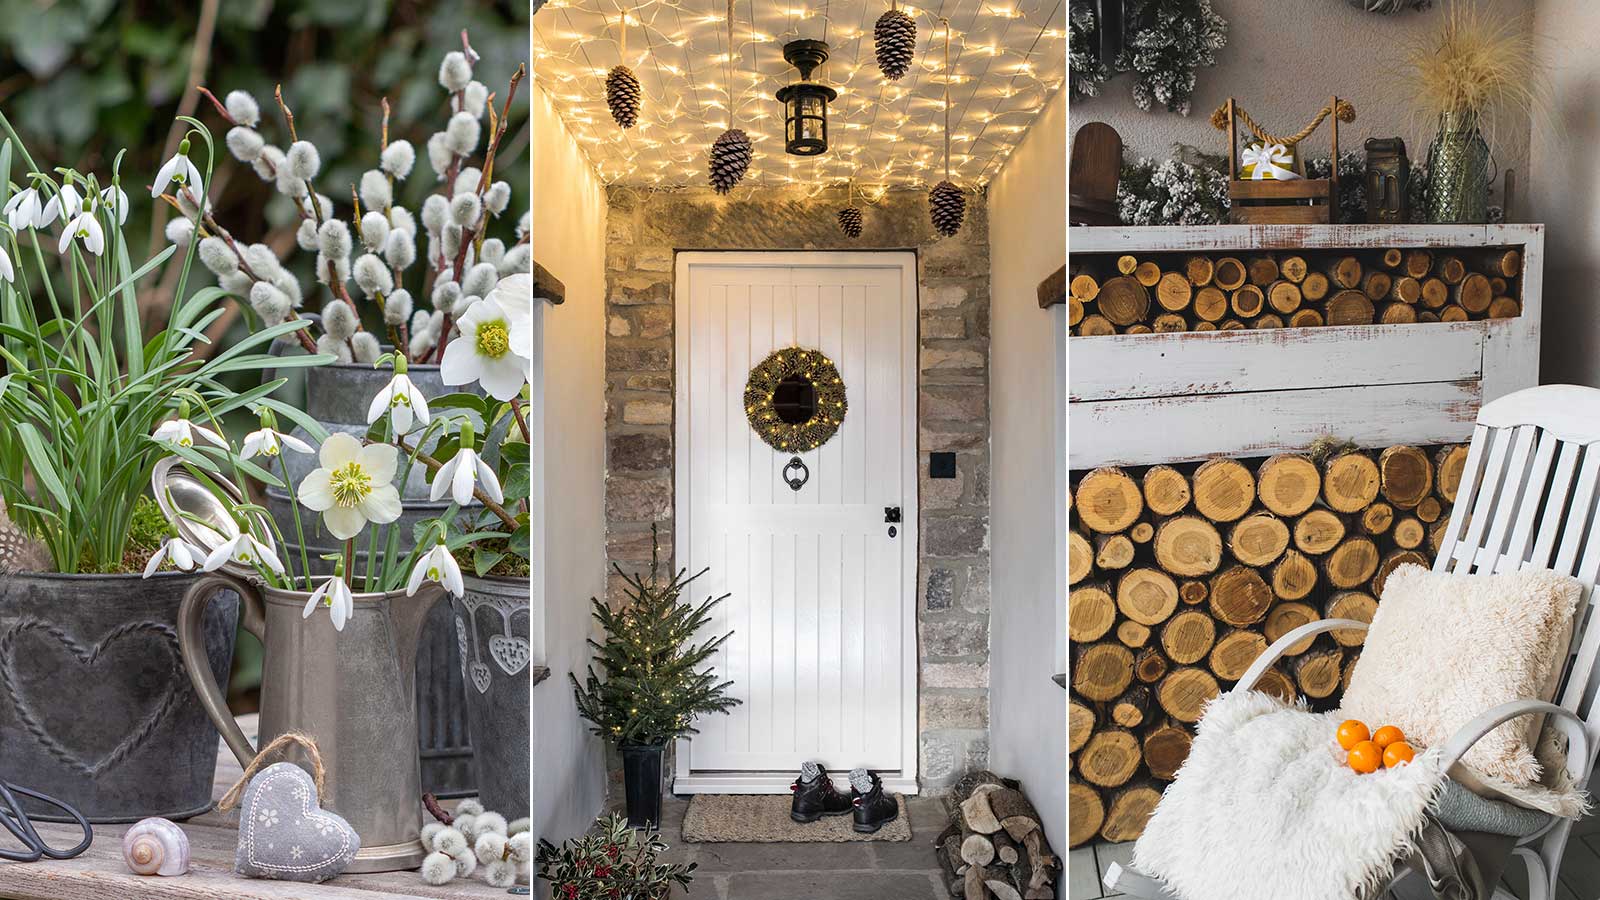 Cozy winter decor ideas for after Christmas - Willow Bloom Home